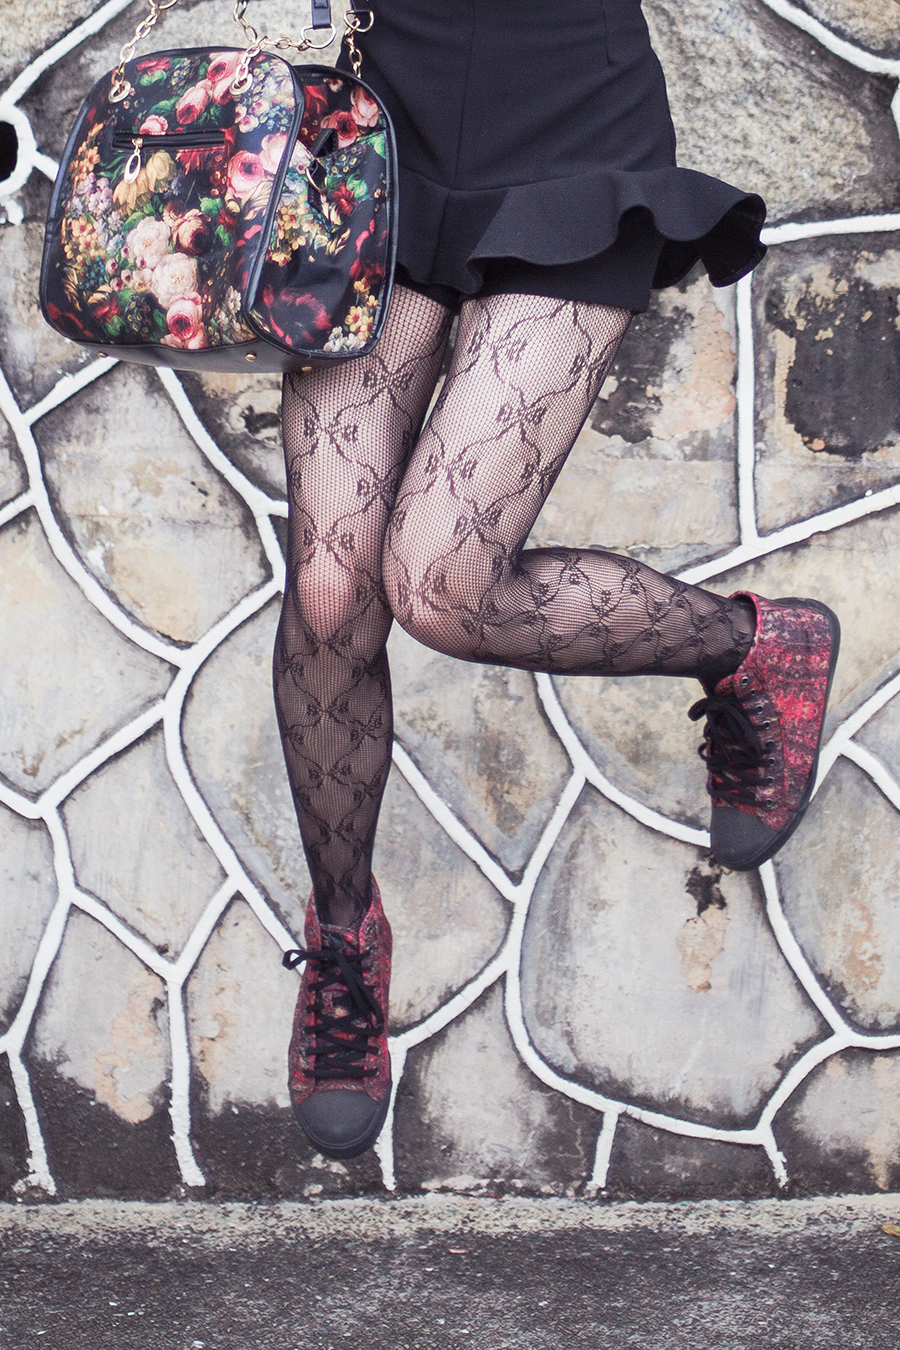 Topshop ribbon lace tights, Dressin floral bag, McQ x Puma high top sneakers, Simply Willow emerald necklace.